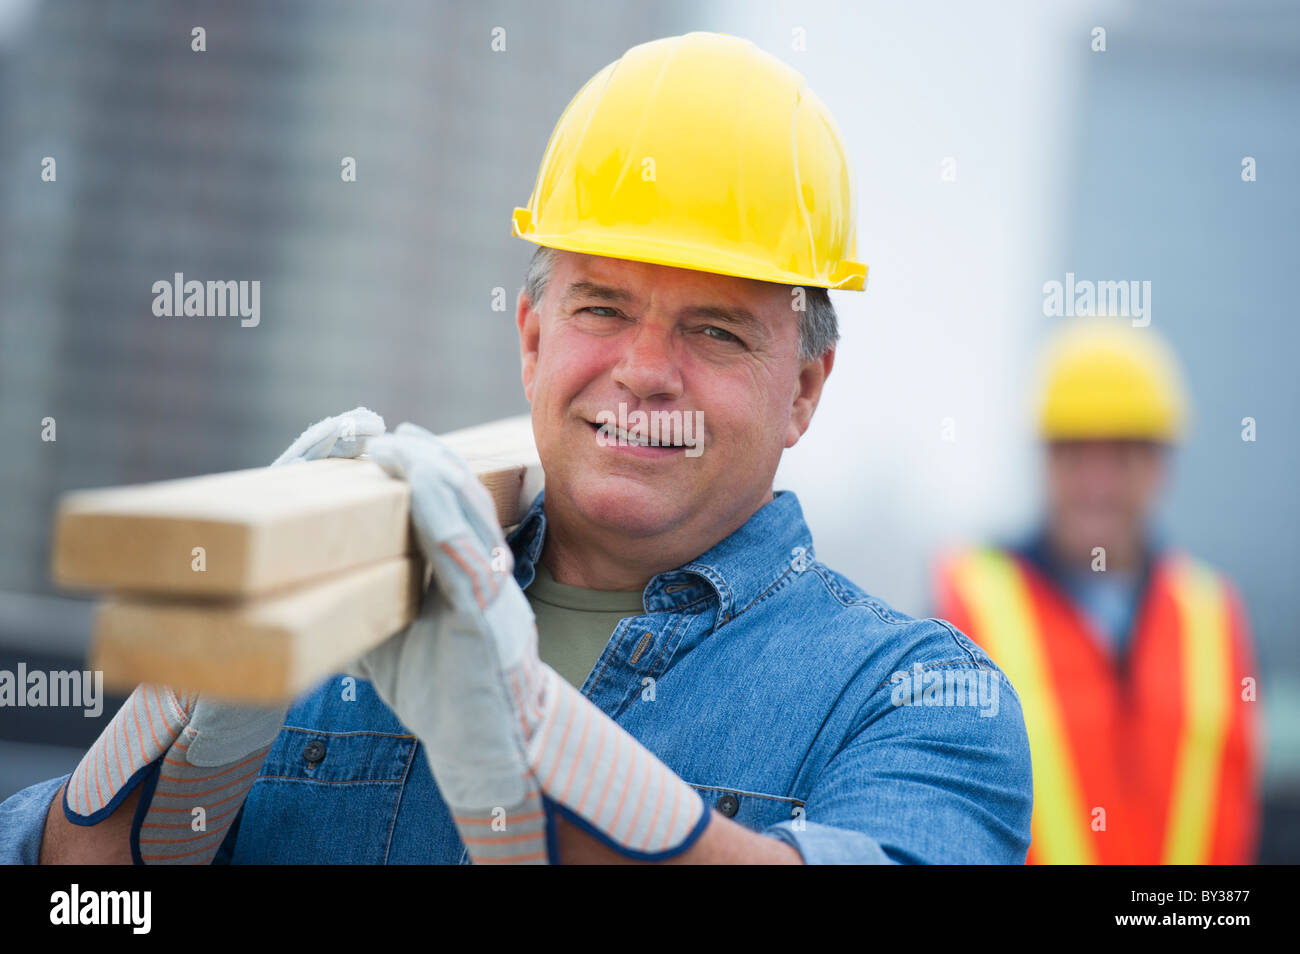 USA, New Jersey, Jersey City, Portrait of construction worker carrying planks Stock Photo